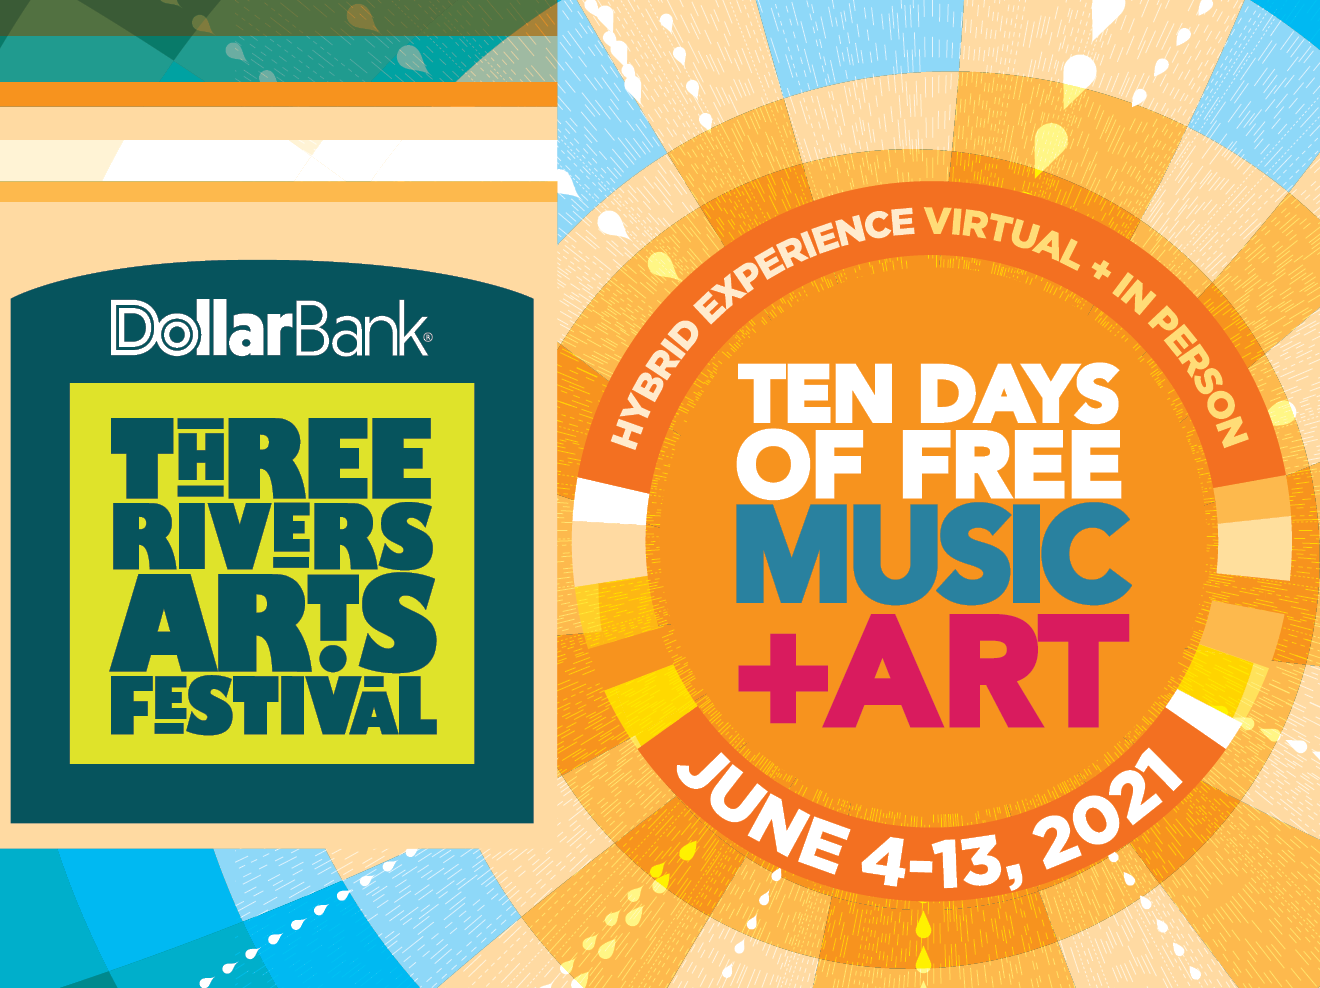 The 62nd Annual Dollar Bank Three Rivers Arts Festival goes hybrid